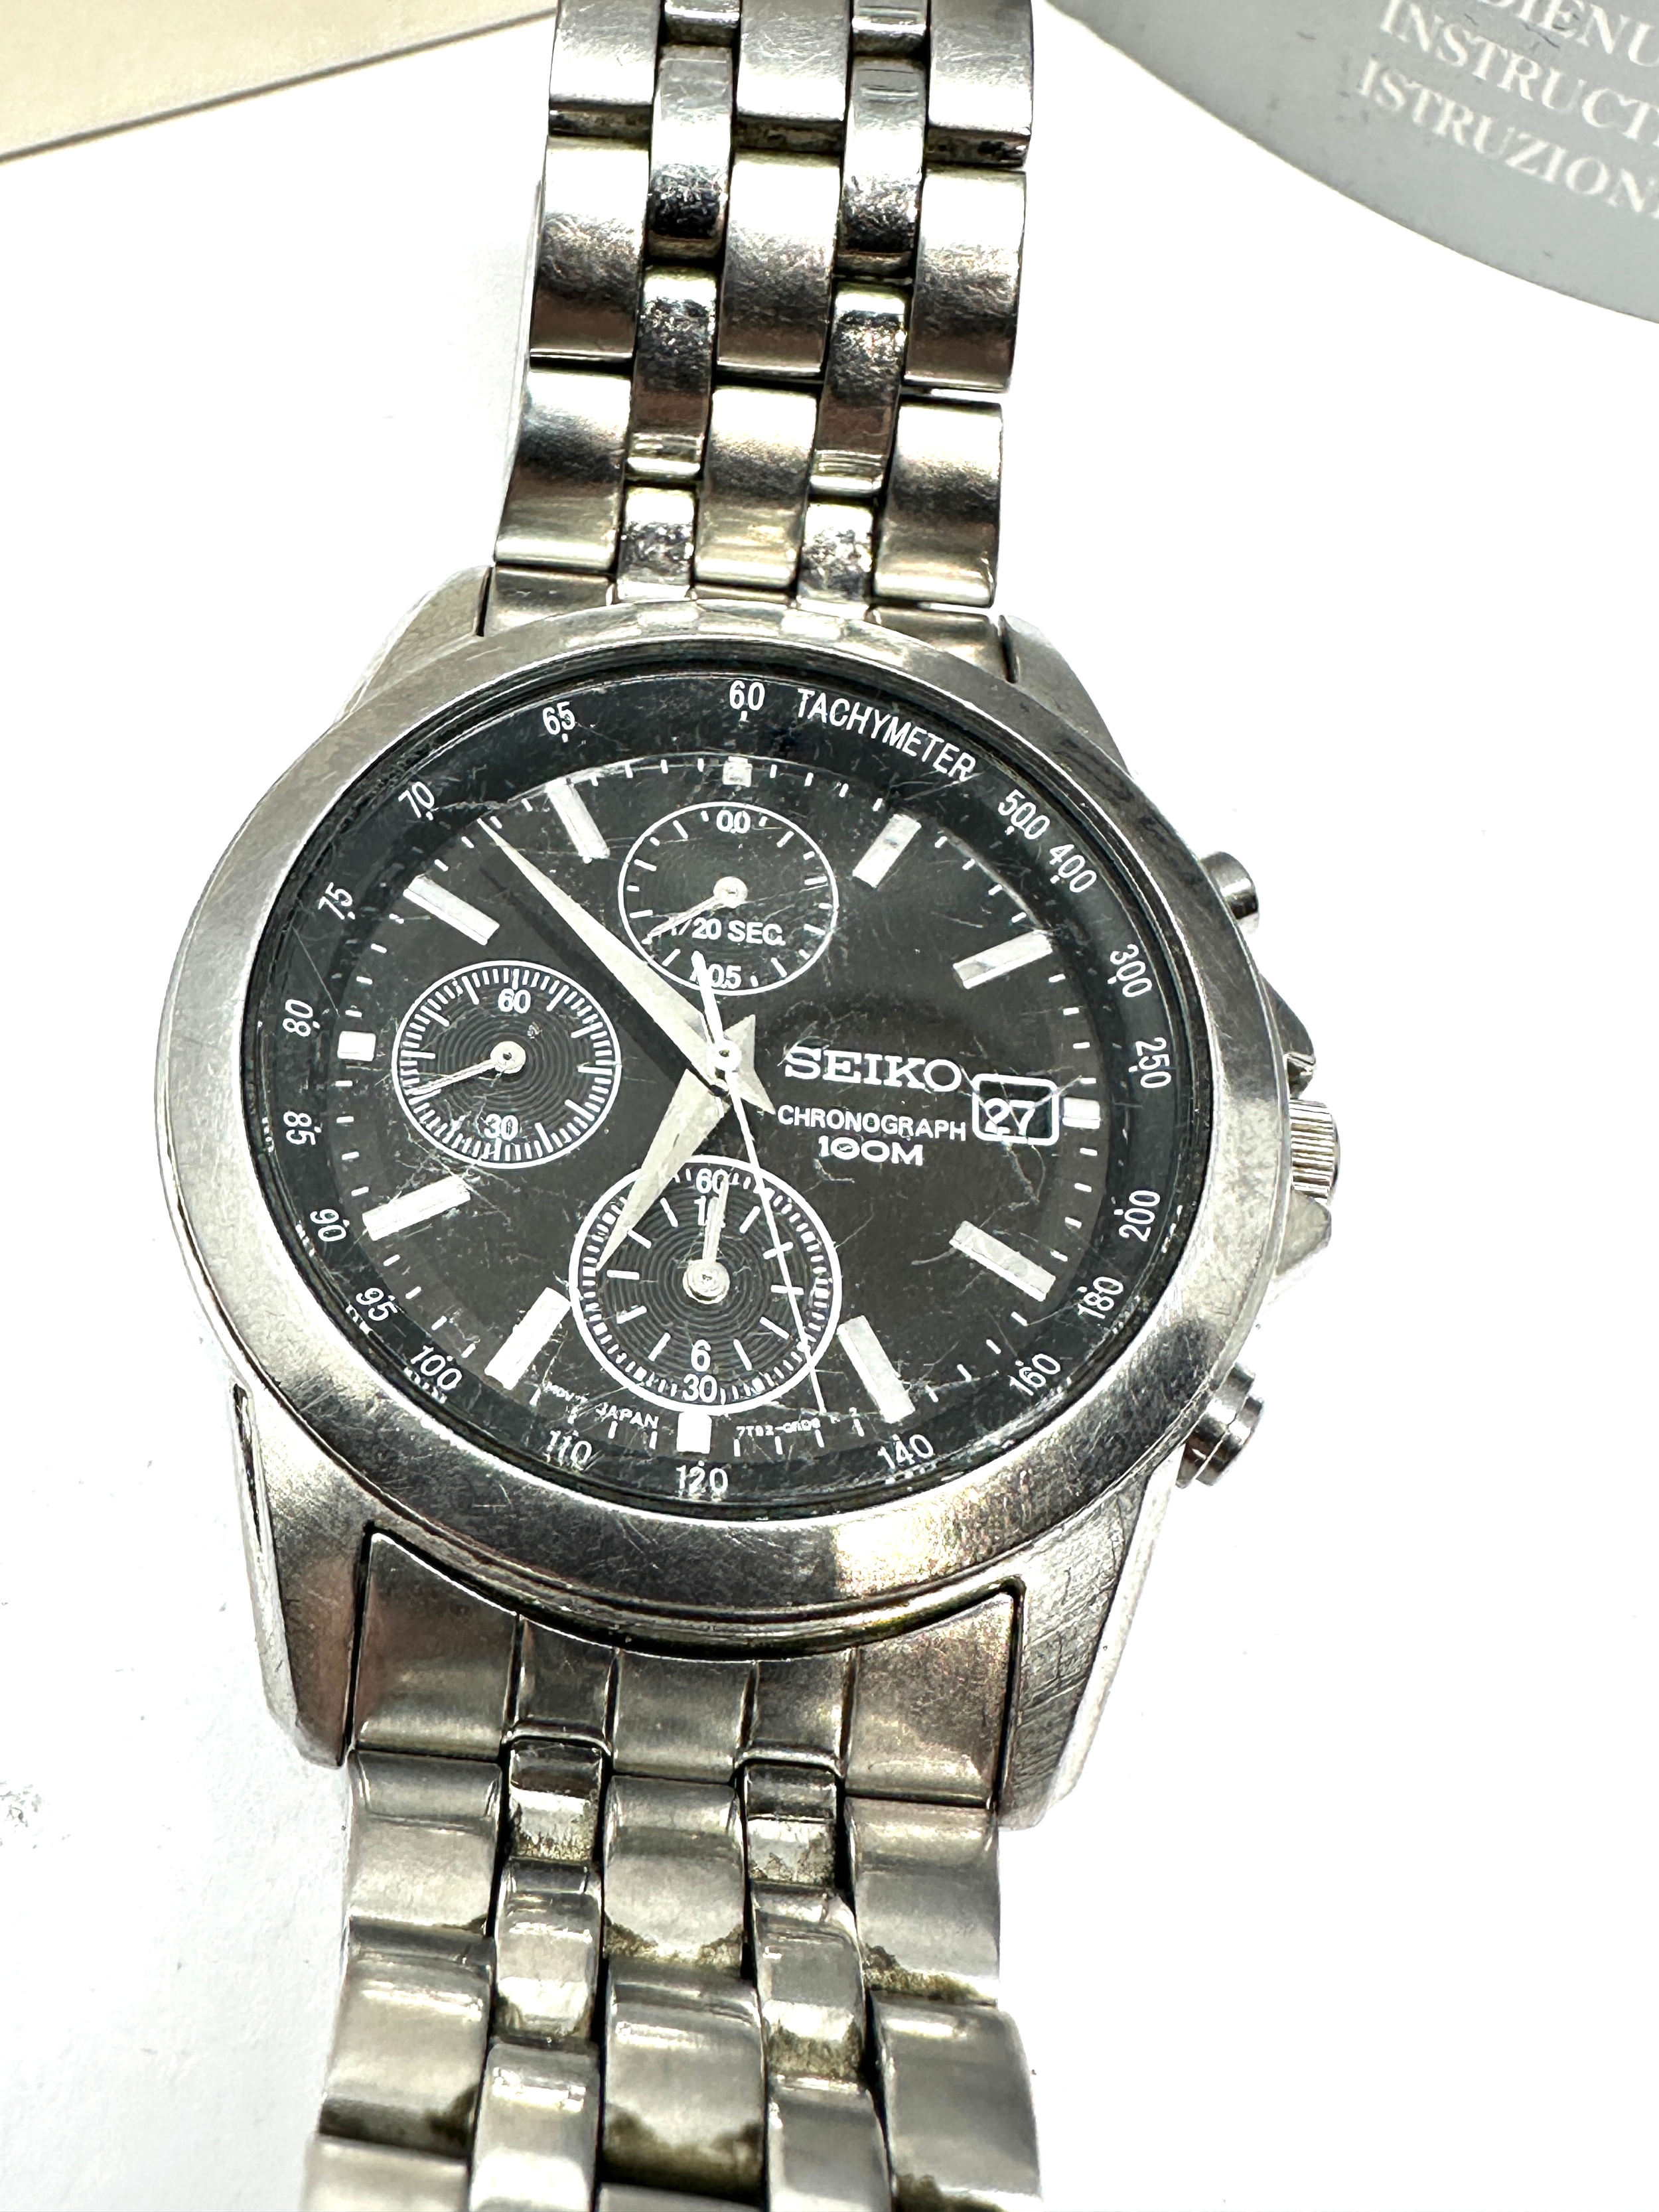 Boxed seiko chronograph 1000m gents quartz wristwatch boxed with booklet spare strap parts - Image 2 of 5